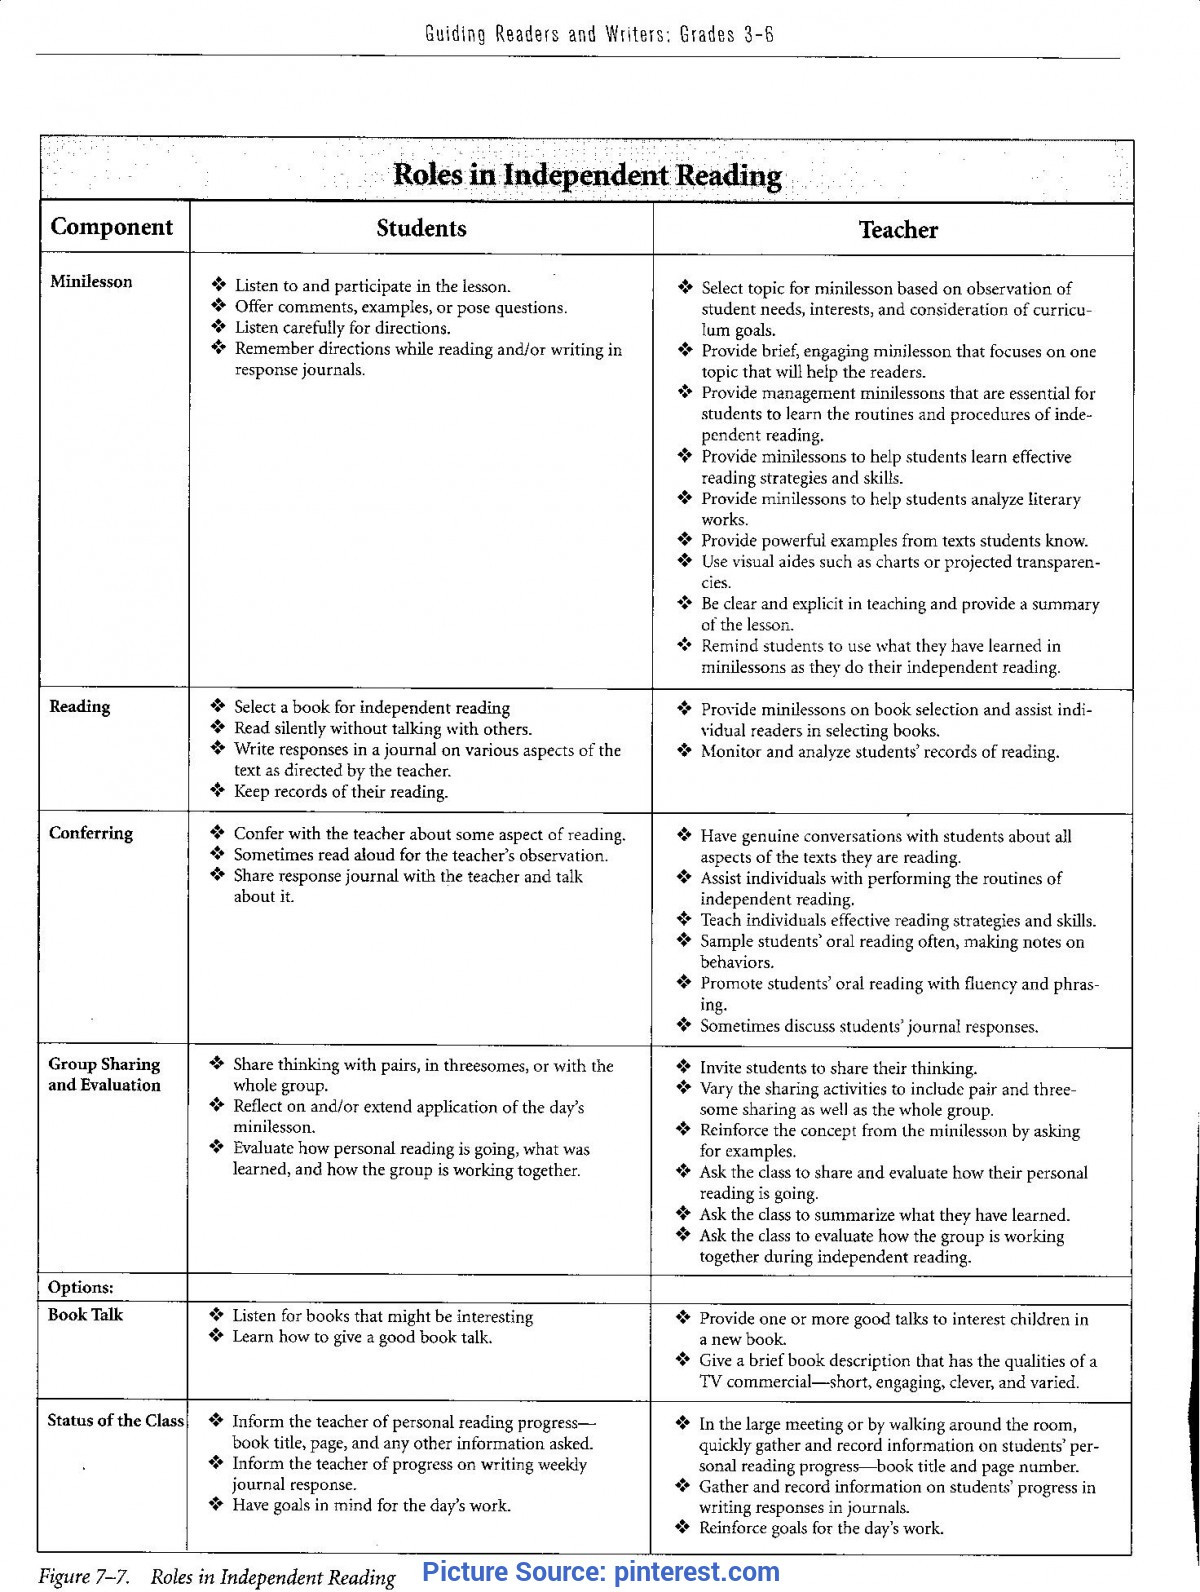 3rd Grade Reading Lesson Plans Plex Guided Reading Lesson Plan Template for 3rd Grade